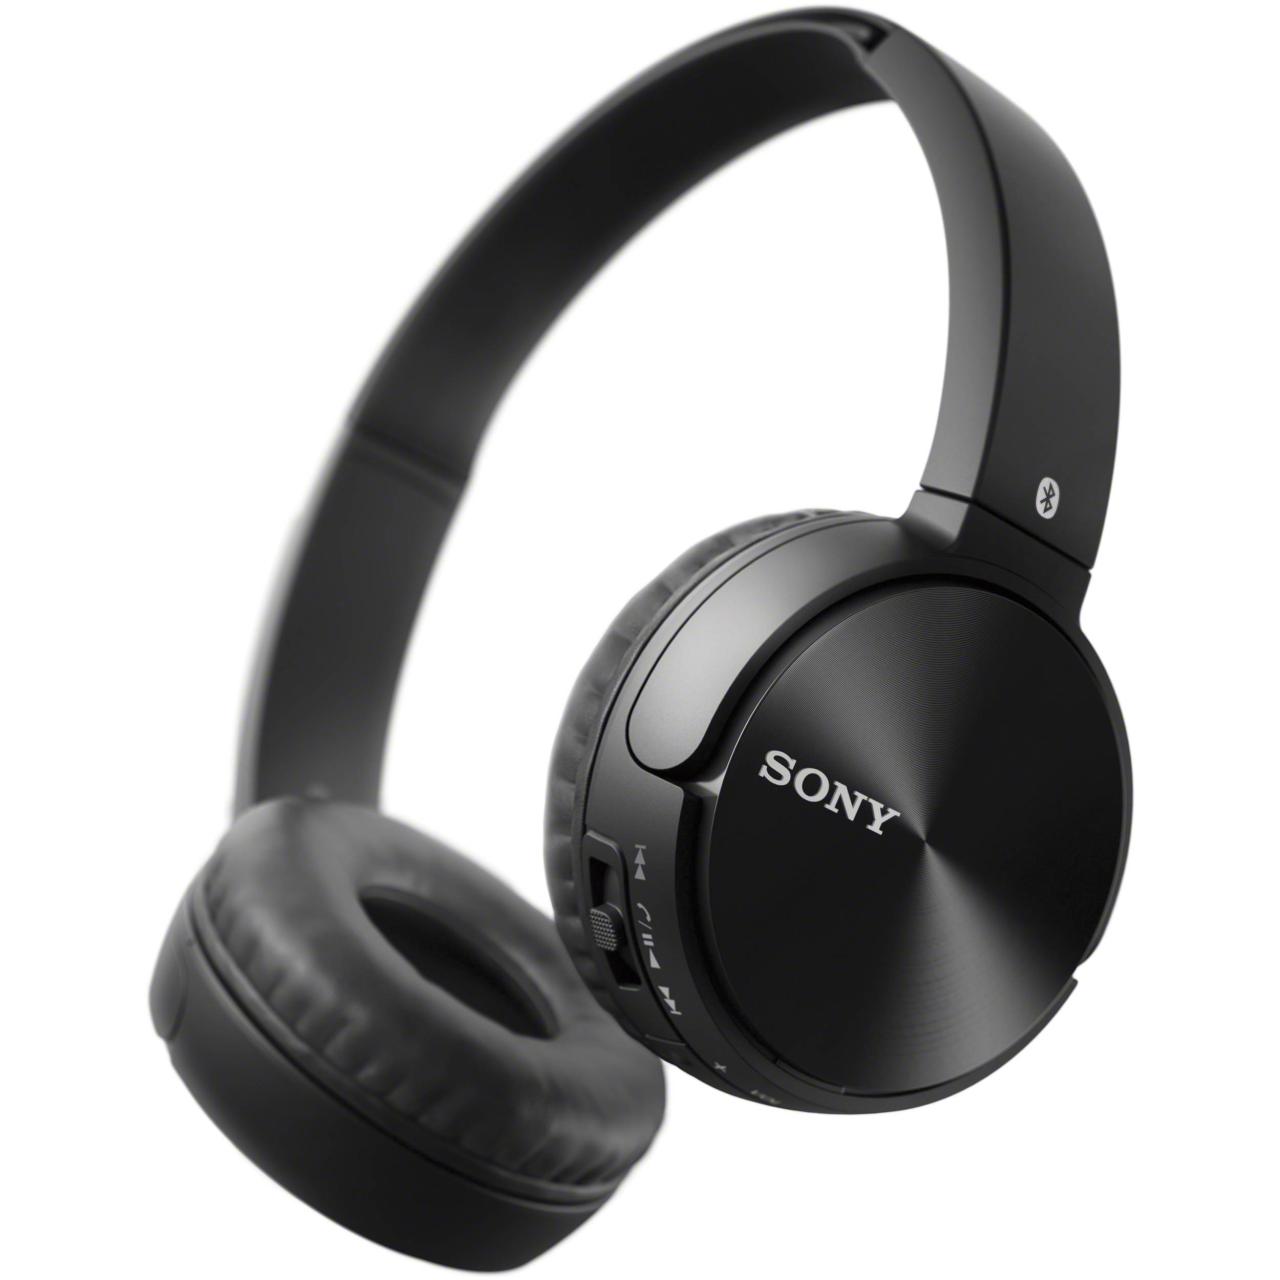 sony bluetooth headset for truck drivers
